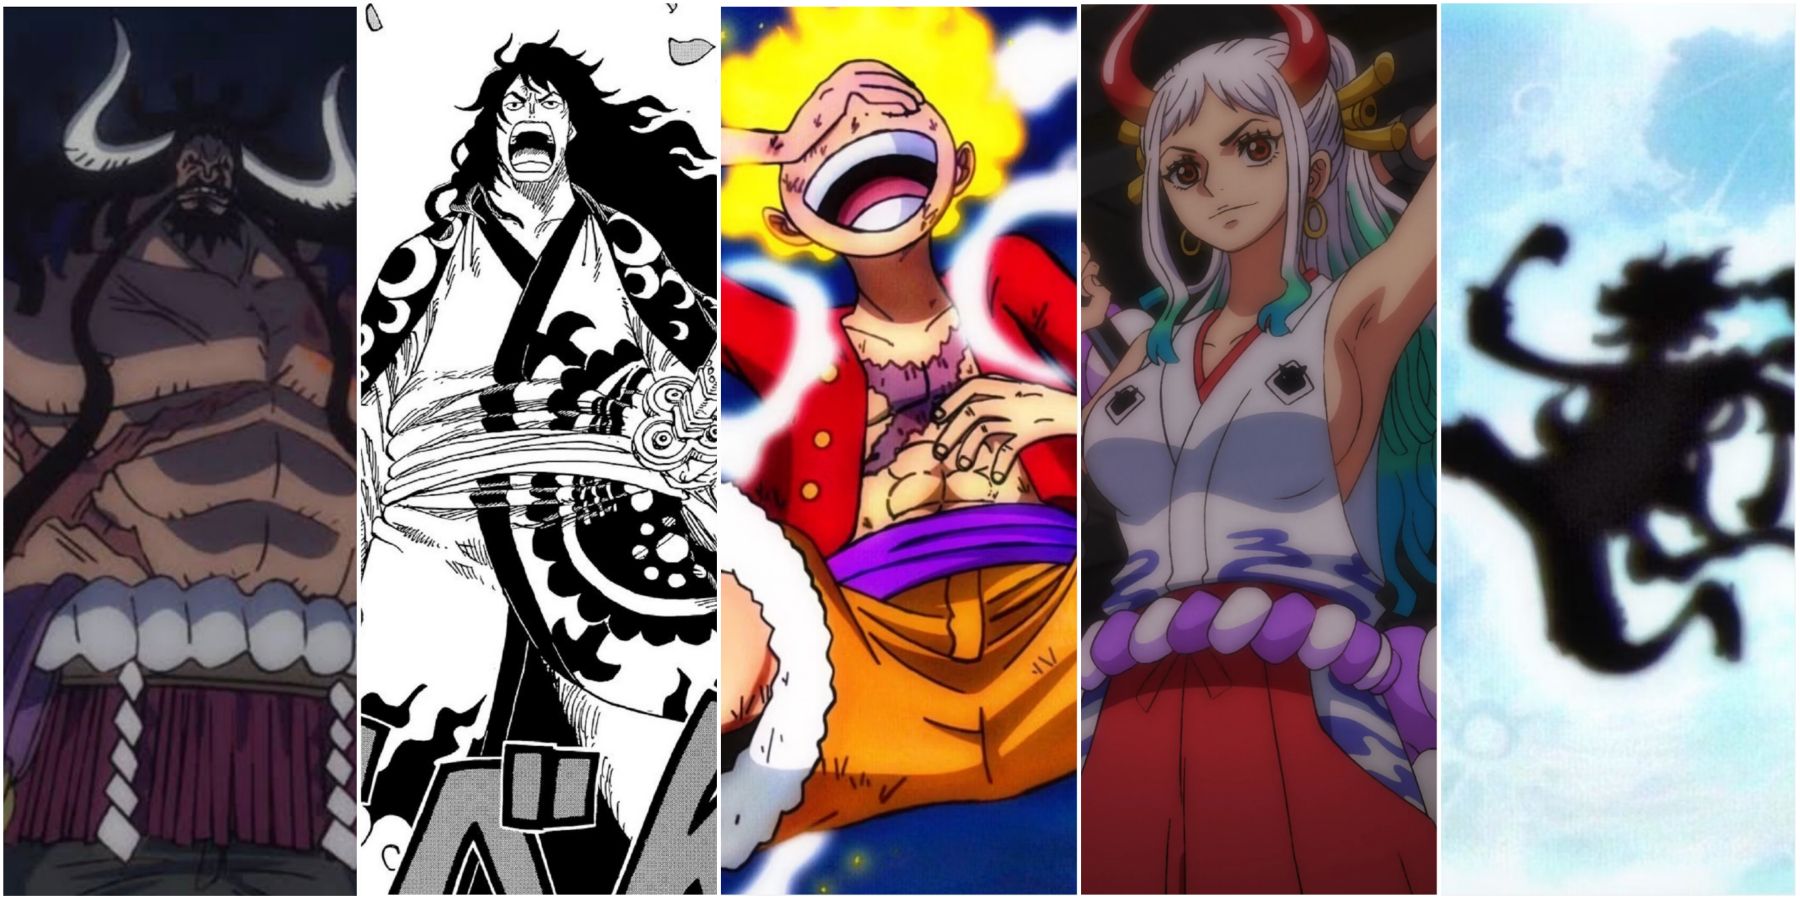 One Piece: Did The Wano Arc Live Up To Expectations?